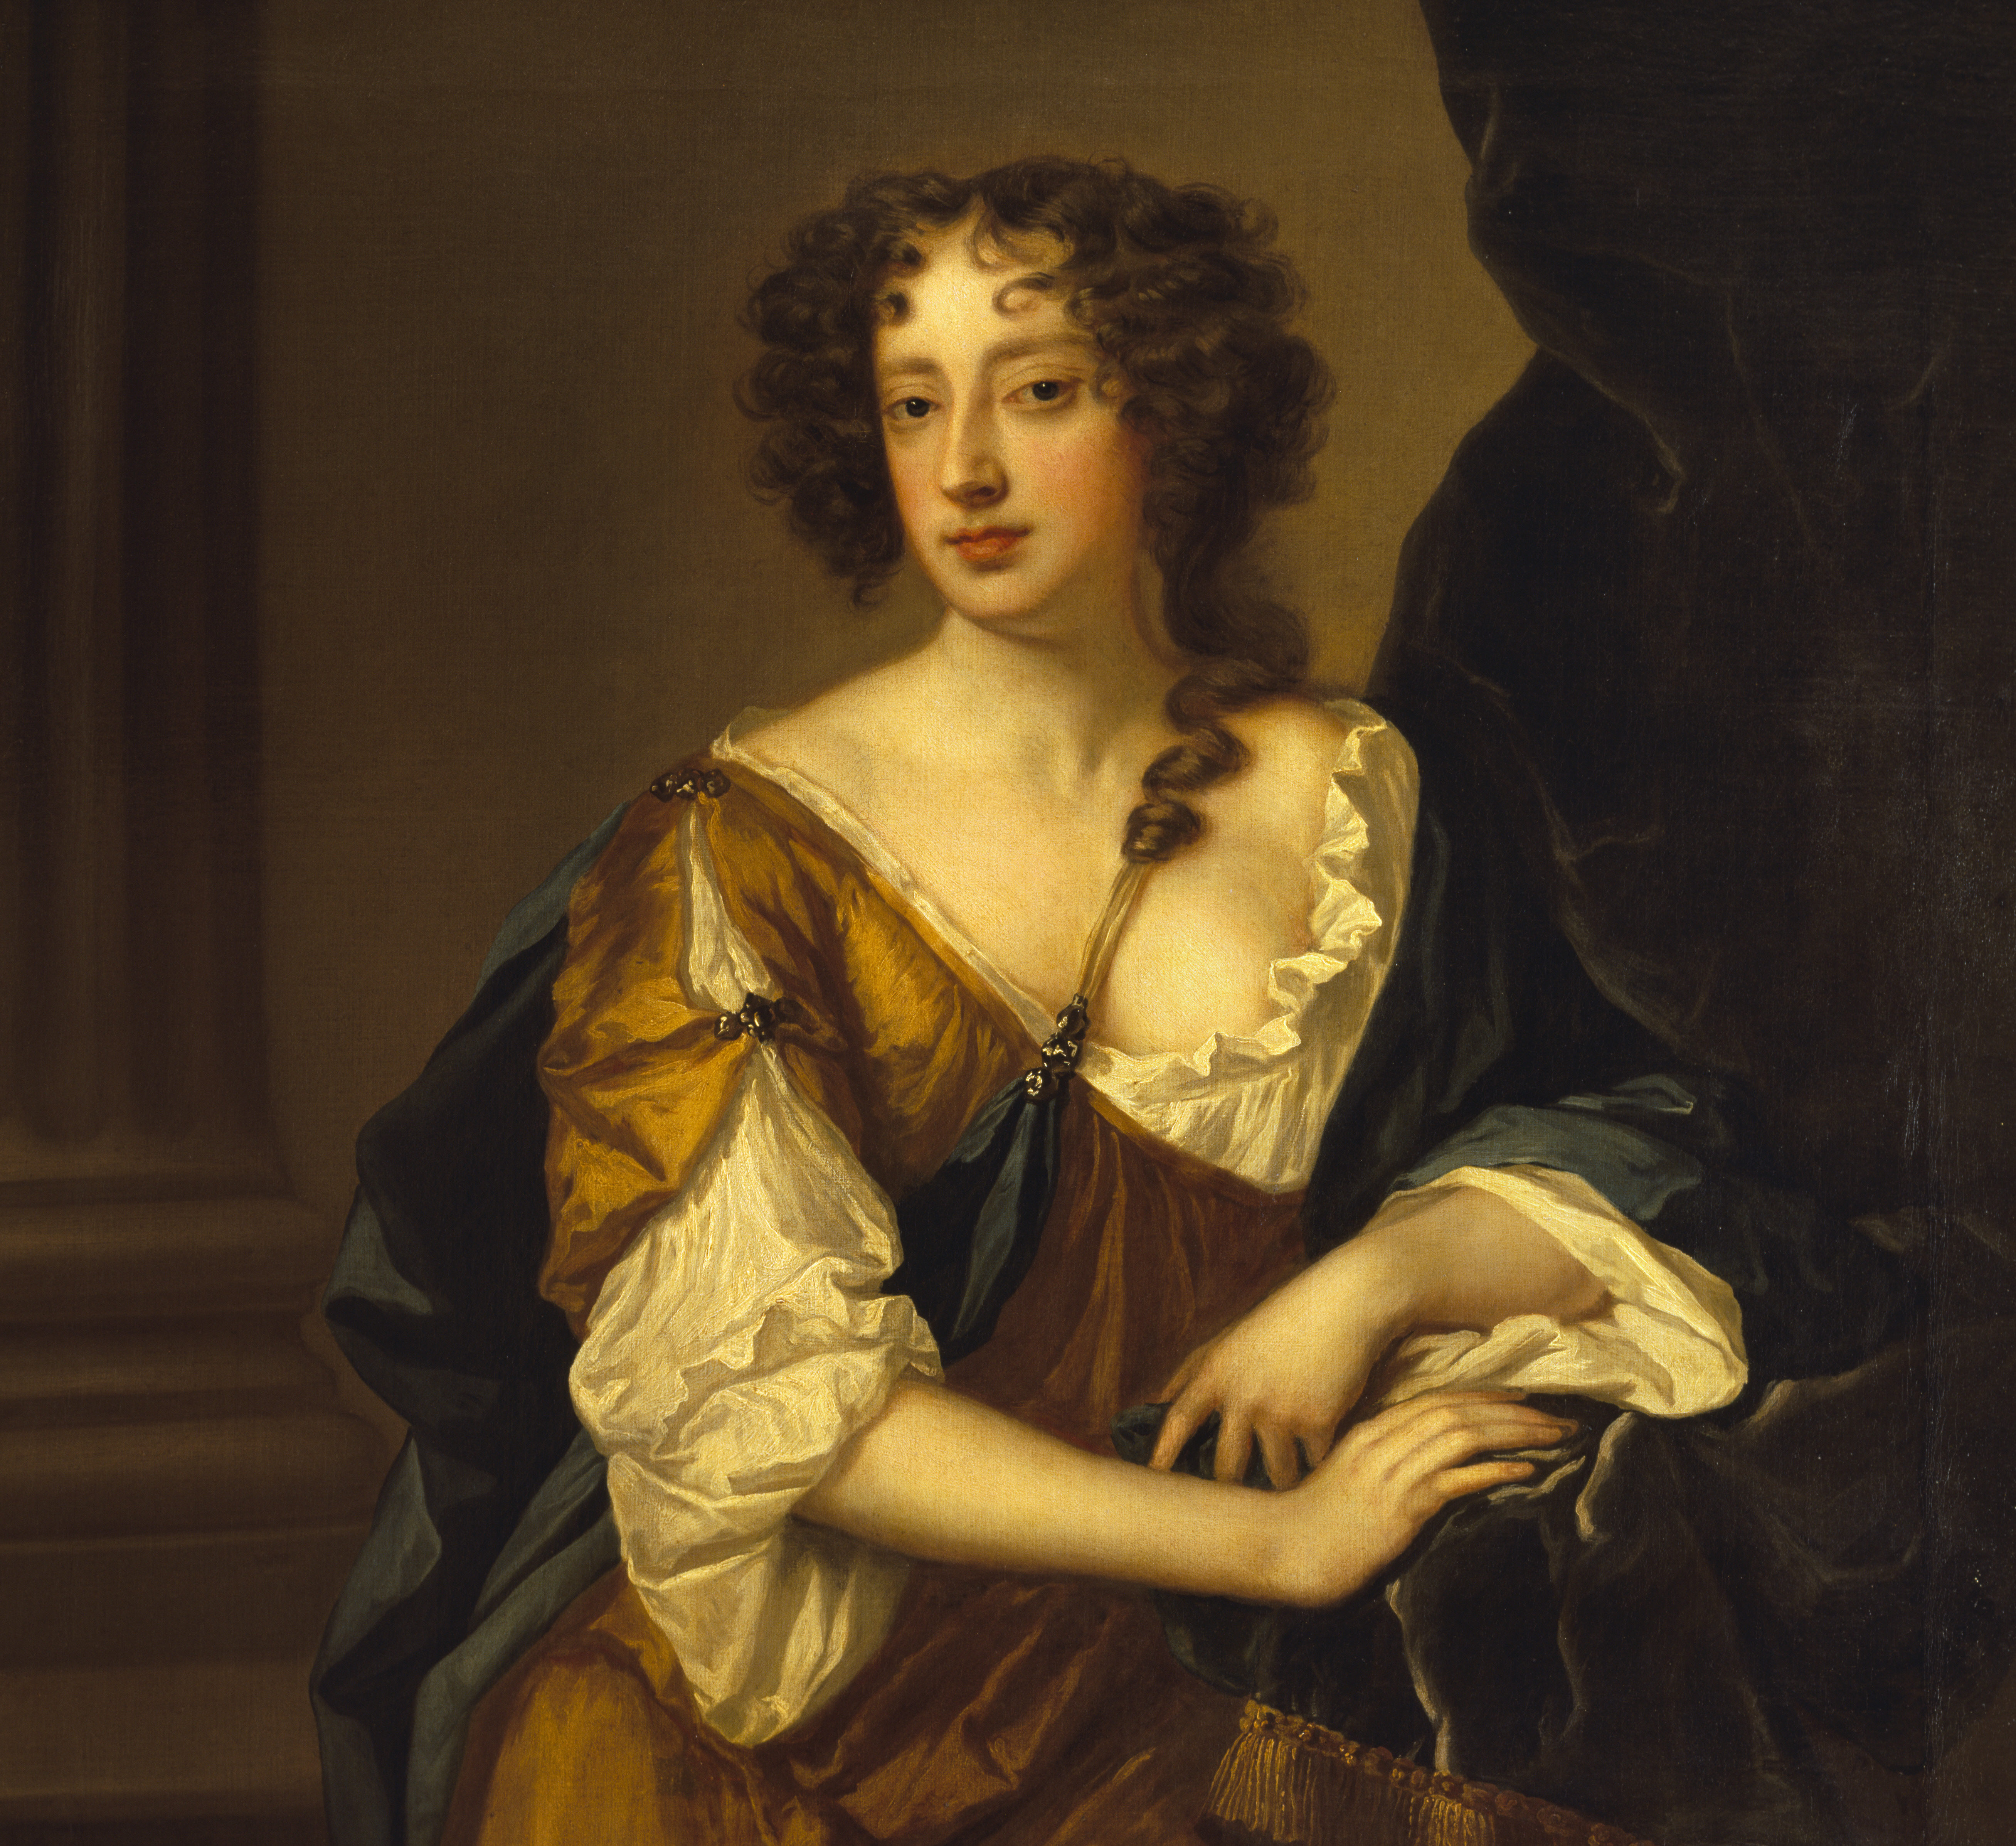 Lady Wriothesley, Duchess of Montagu, studio of Sir Peter Lely ©National Trust Images Derrick E. Witty